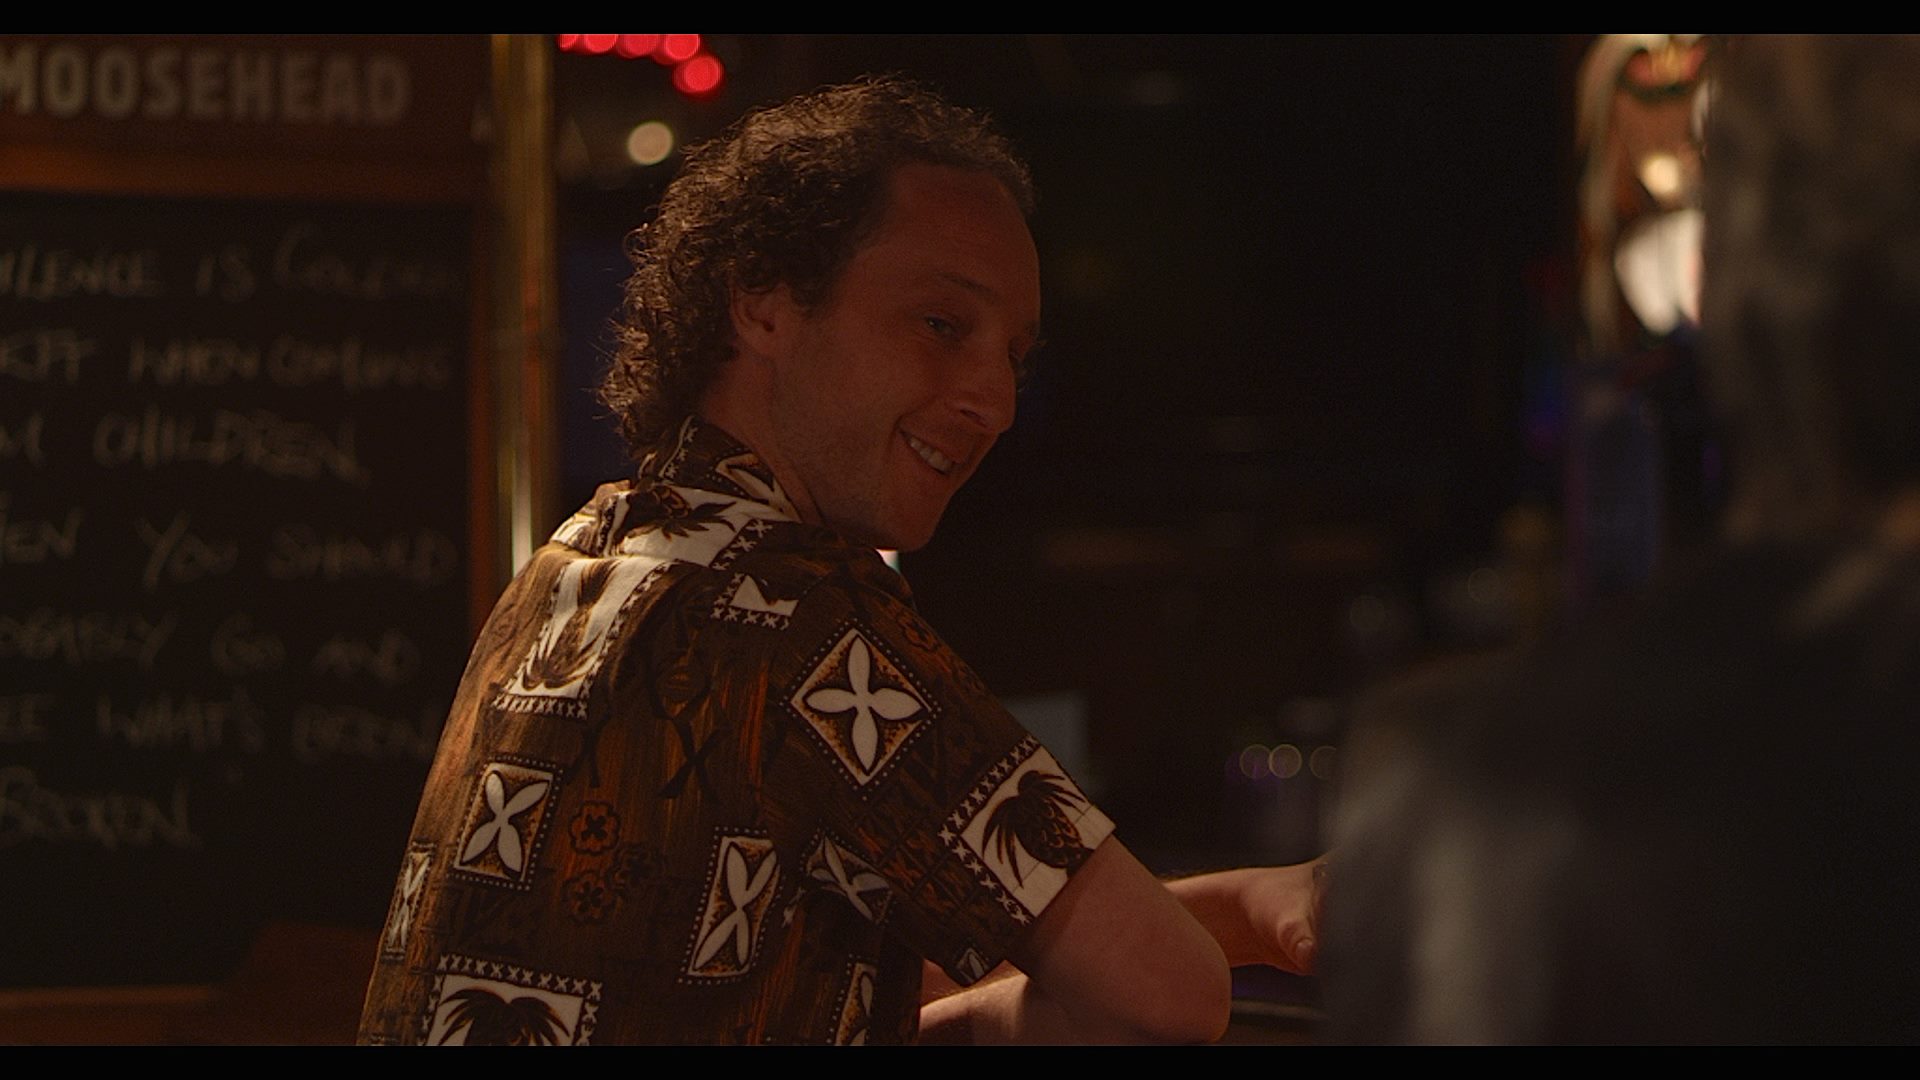 Gregory Penner (Kyle Mitchell) at the bar, getting hit on by Alex Mandalakis (Olympia Dukakis). Sex & Violence (TV Mini-Series 2013). Episode 101.